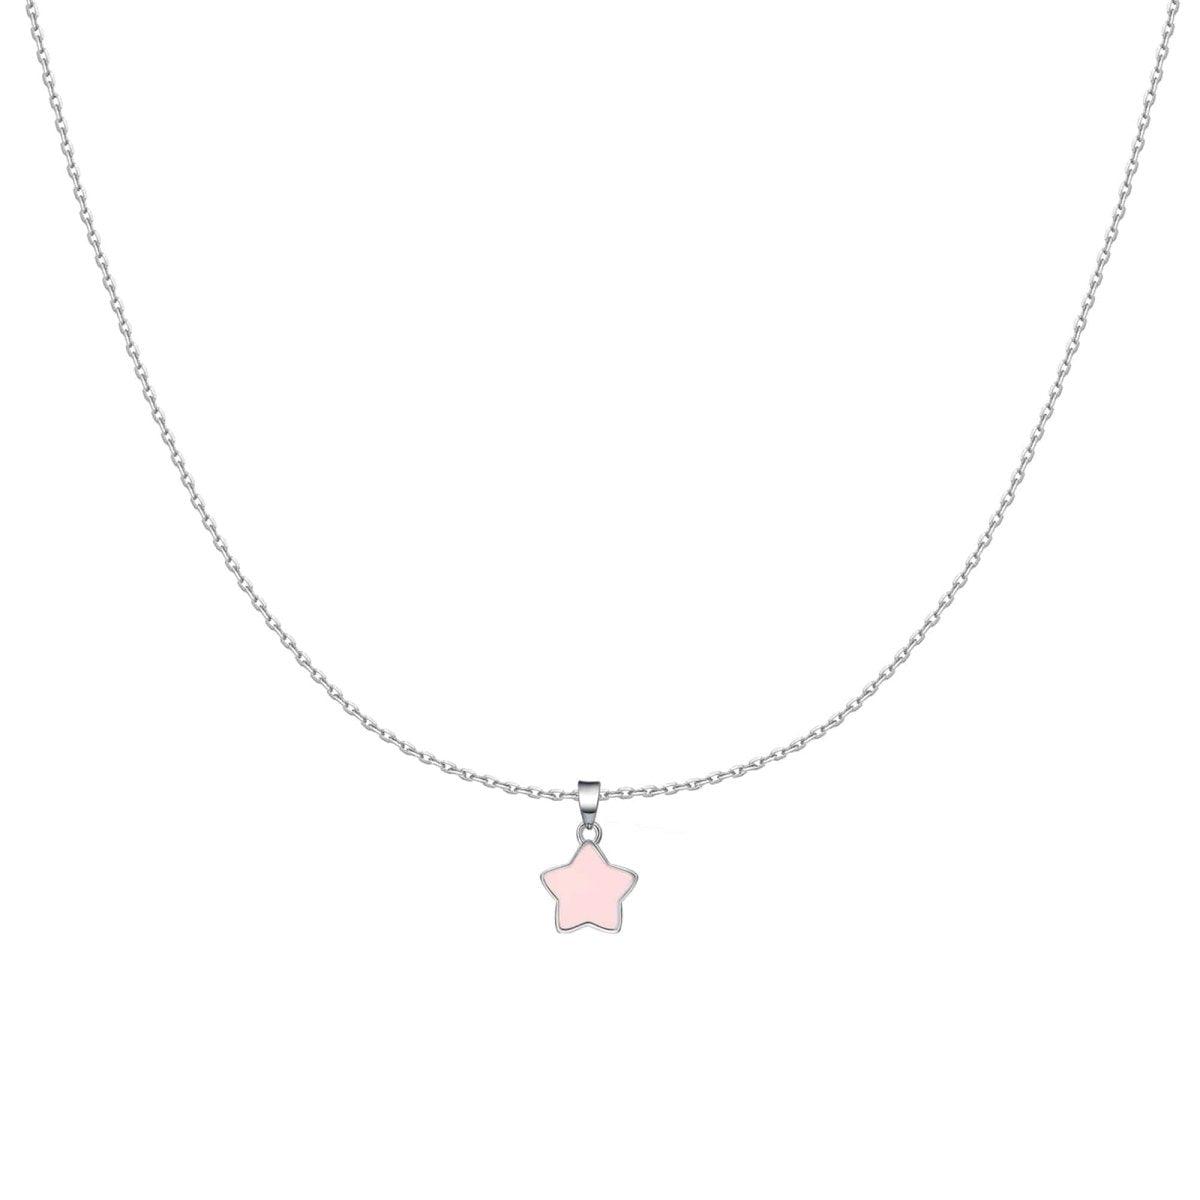 "Pink Star" Necklace - Milas Jewels Shop